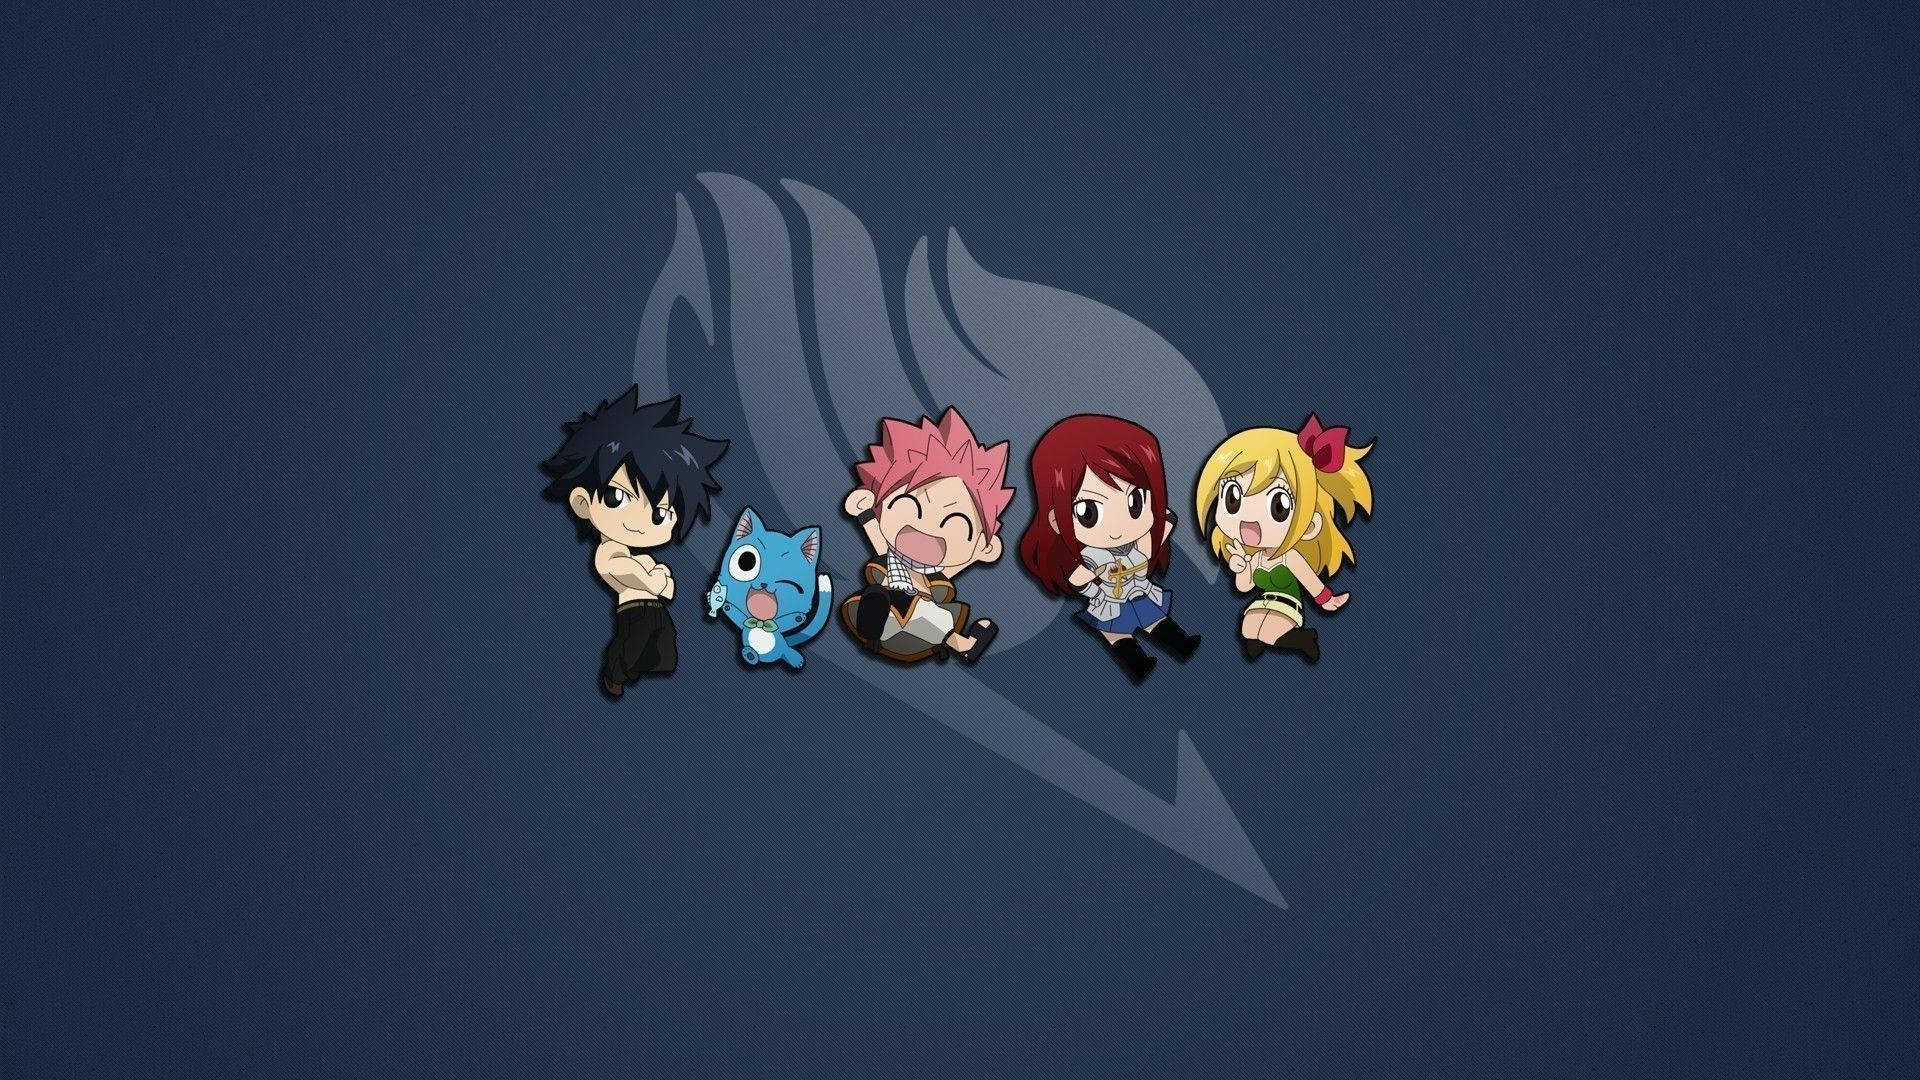 A Chibi Adventure Group from Fairy Tail Wallpaper